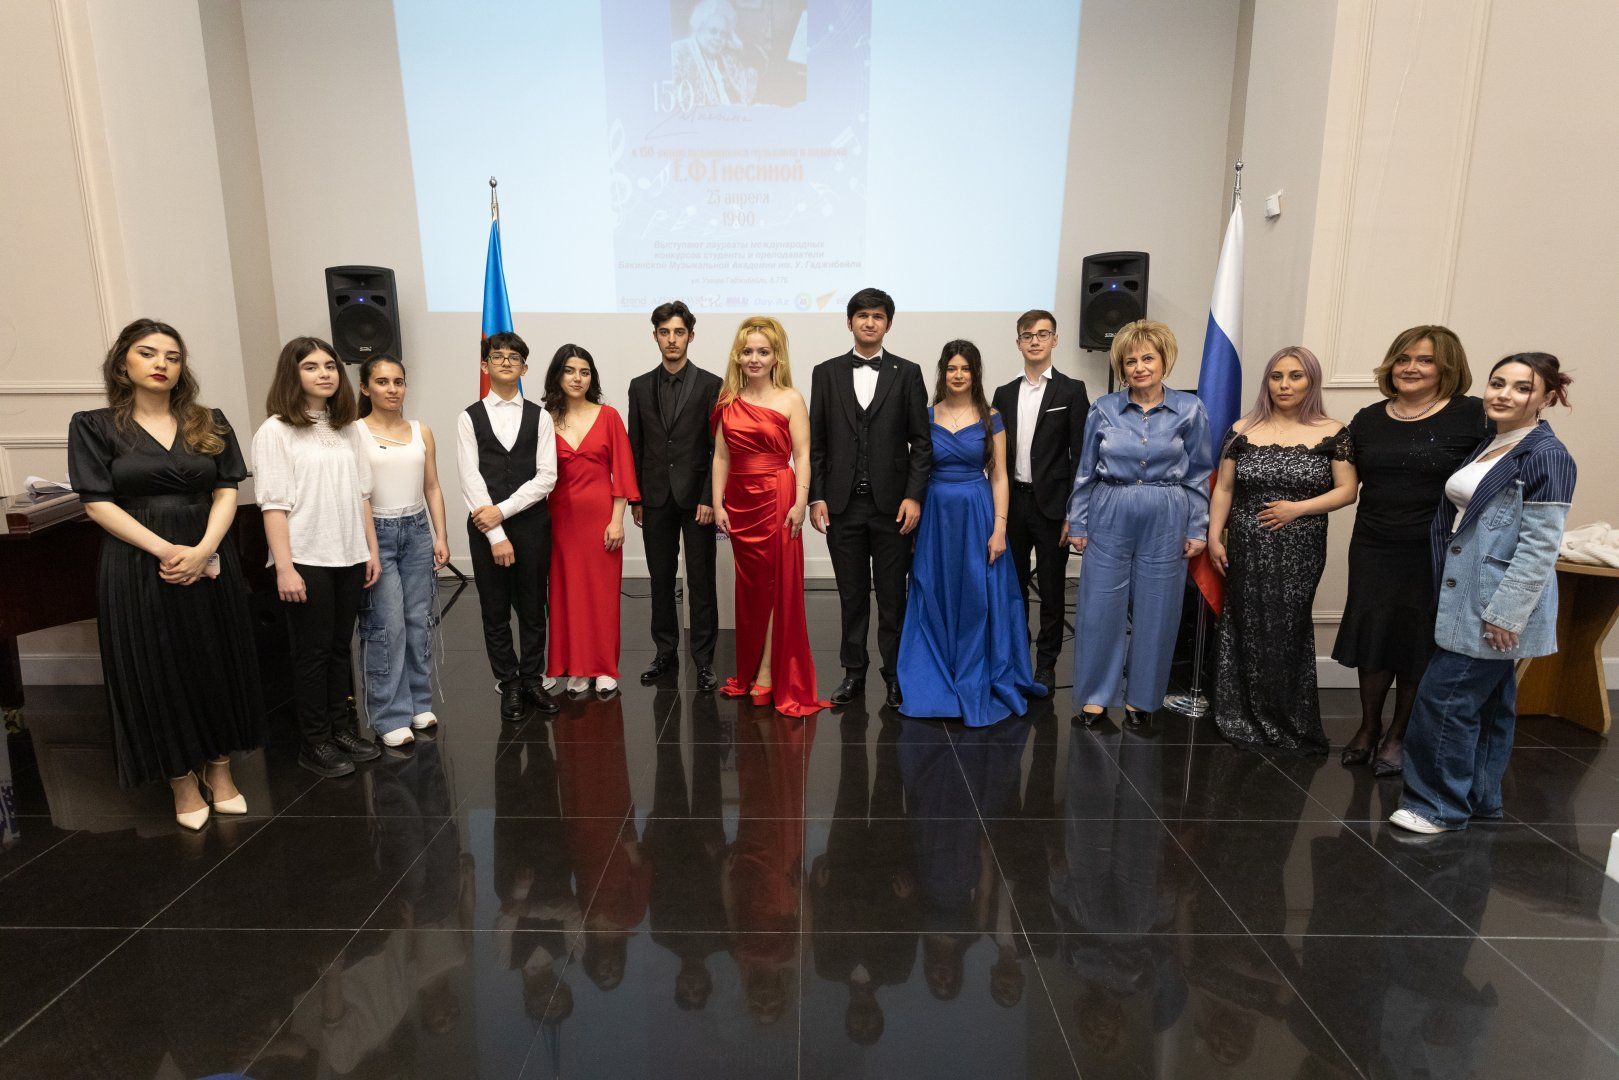 Russian House in Baku celebrates jubilee of well-known musician [PHOTOS]